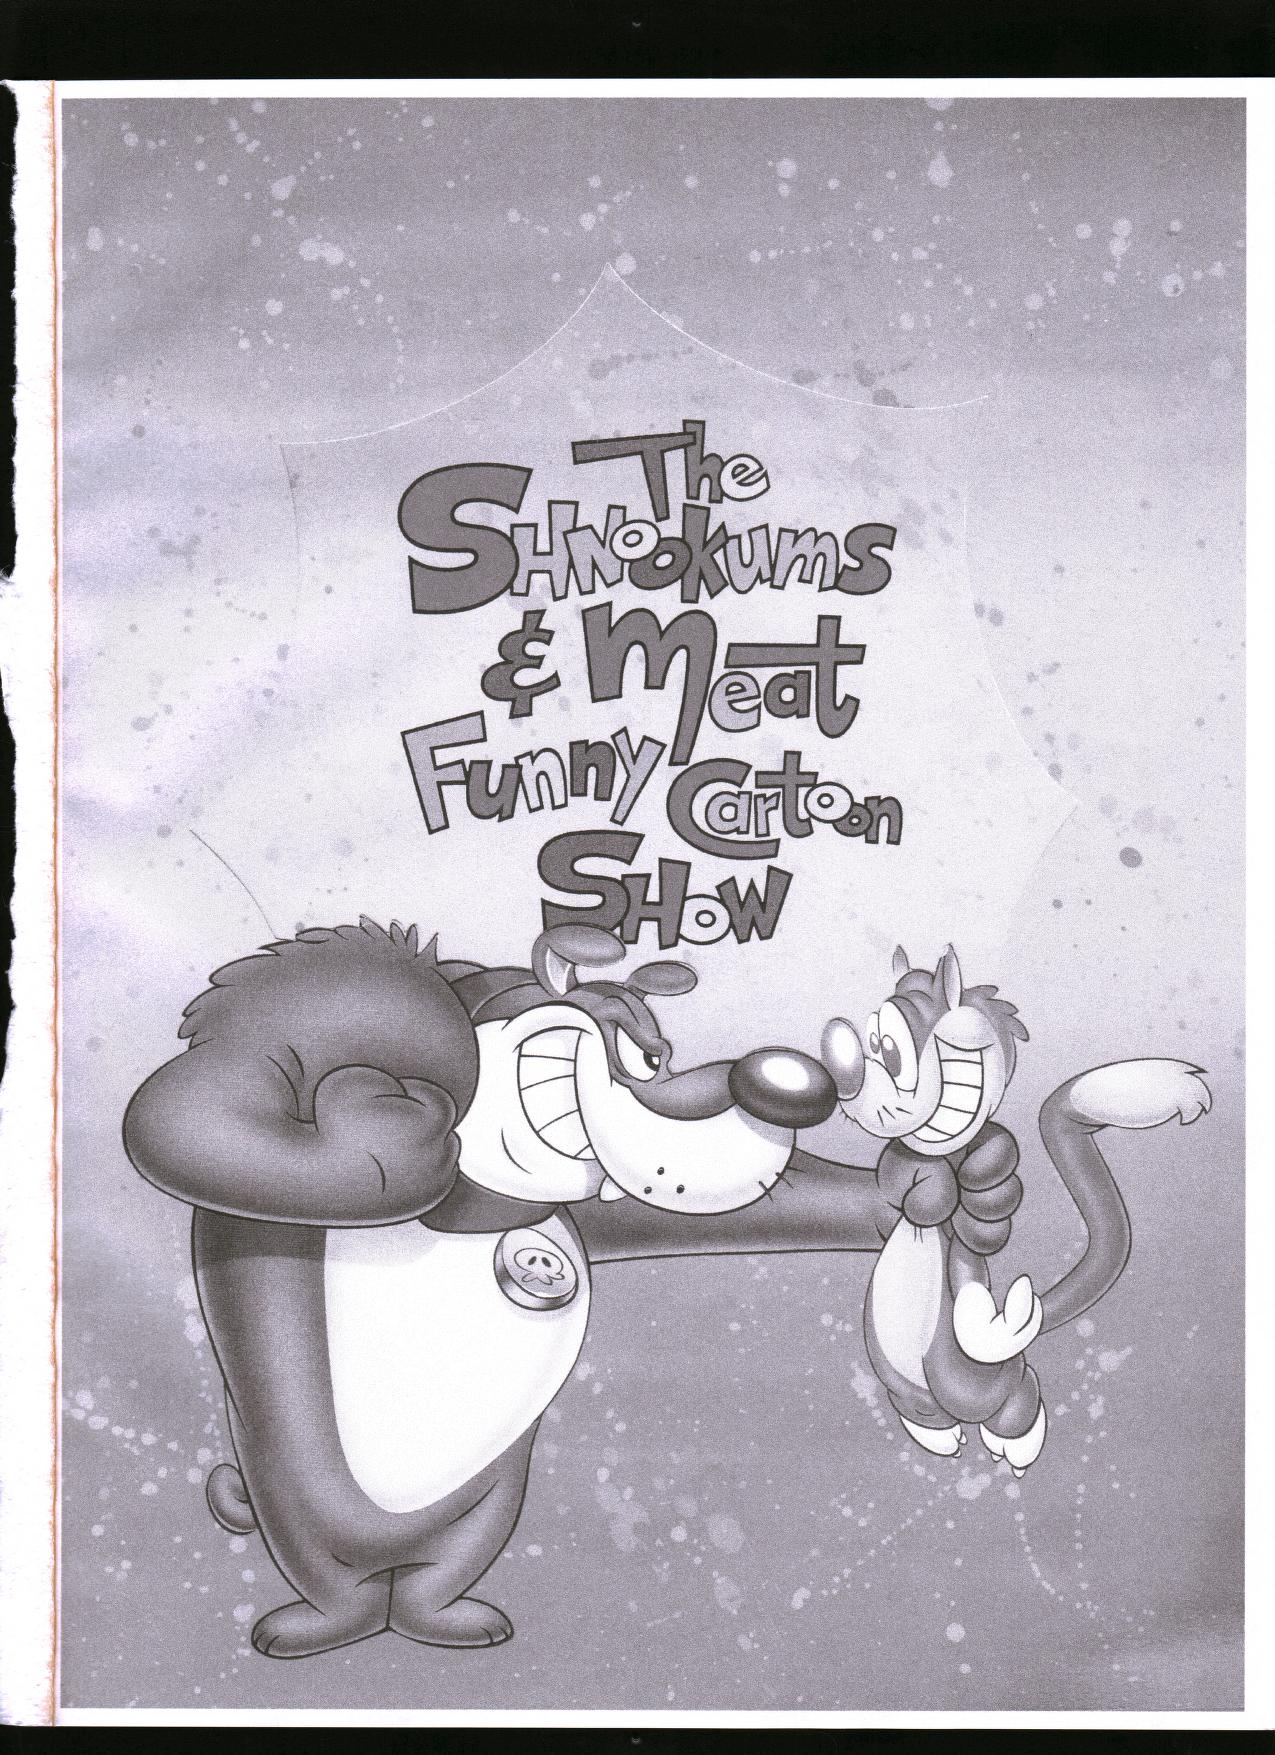 The Shnookums & Meat funny cartoon show press kit and model pack : Bill  Kopp : Free Download, Borrow, and Streaming : Internet Archive